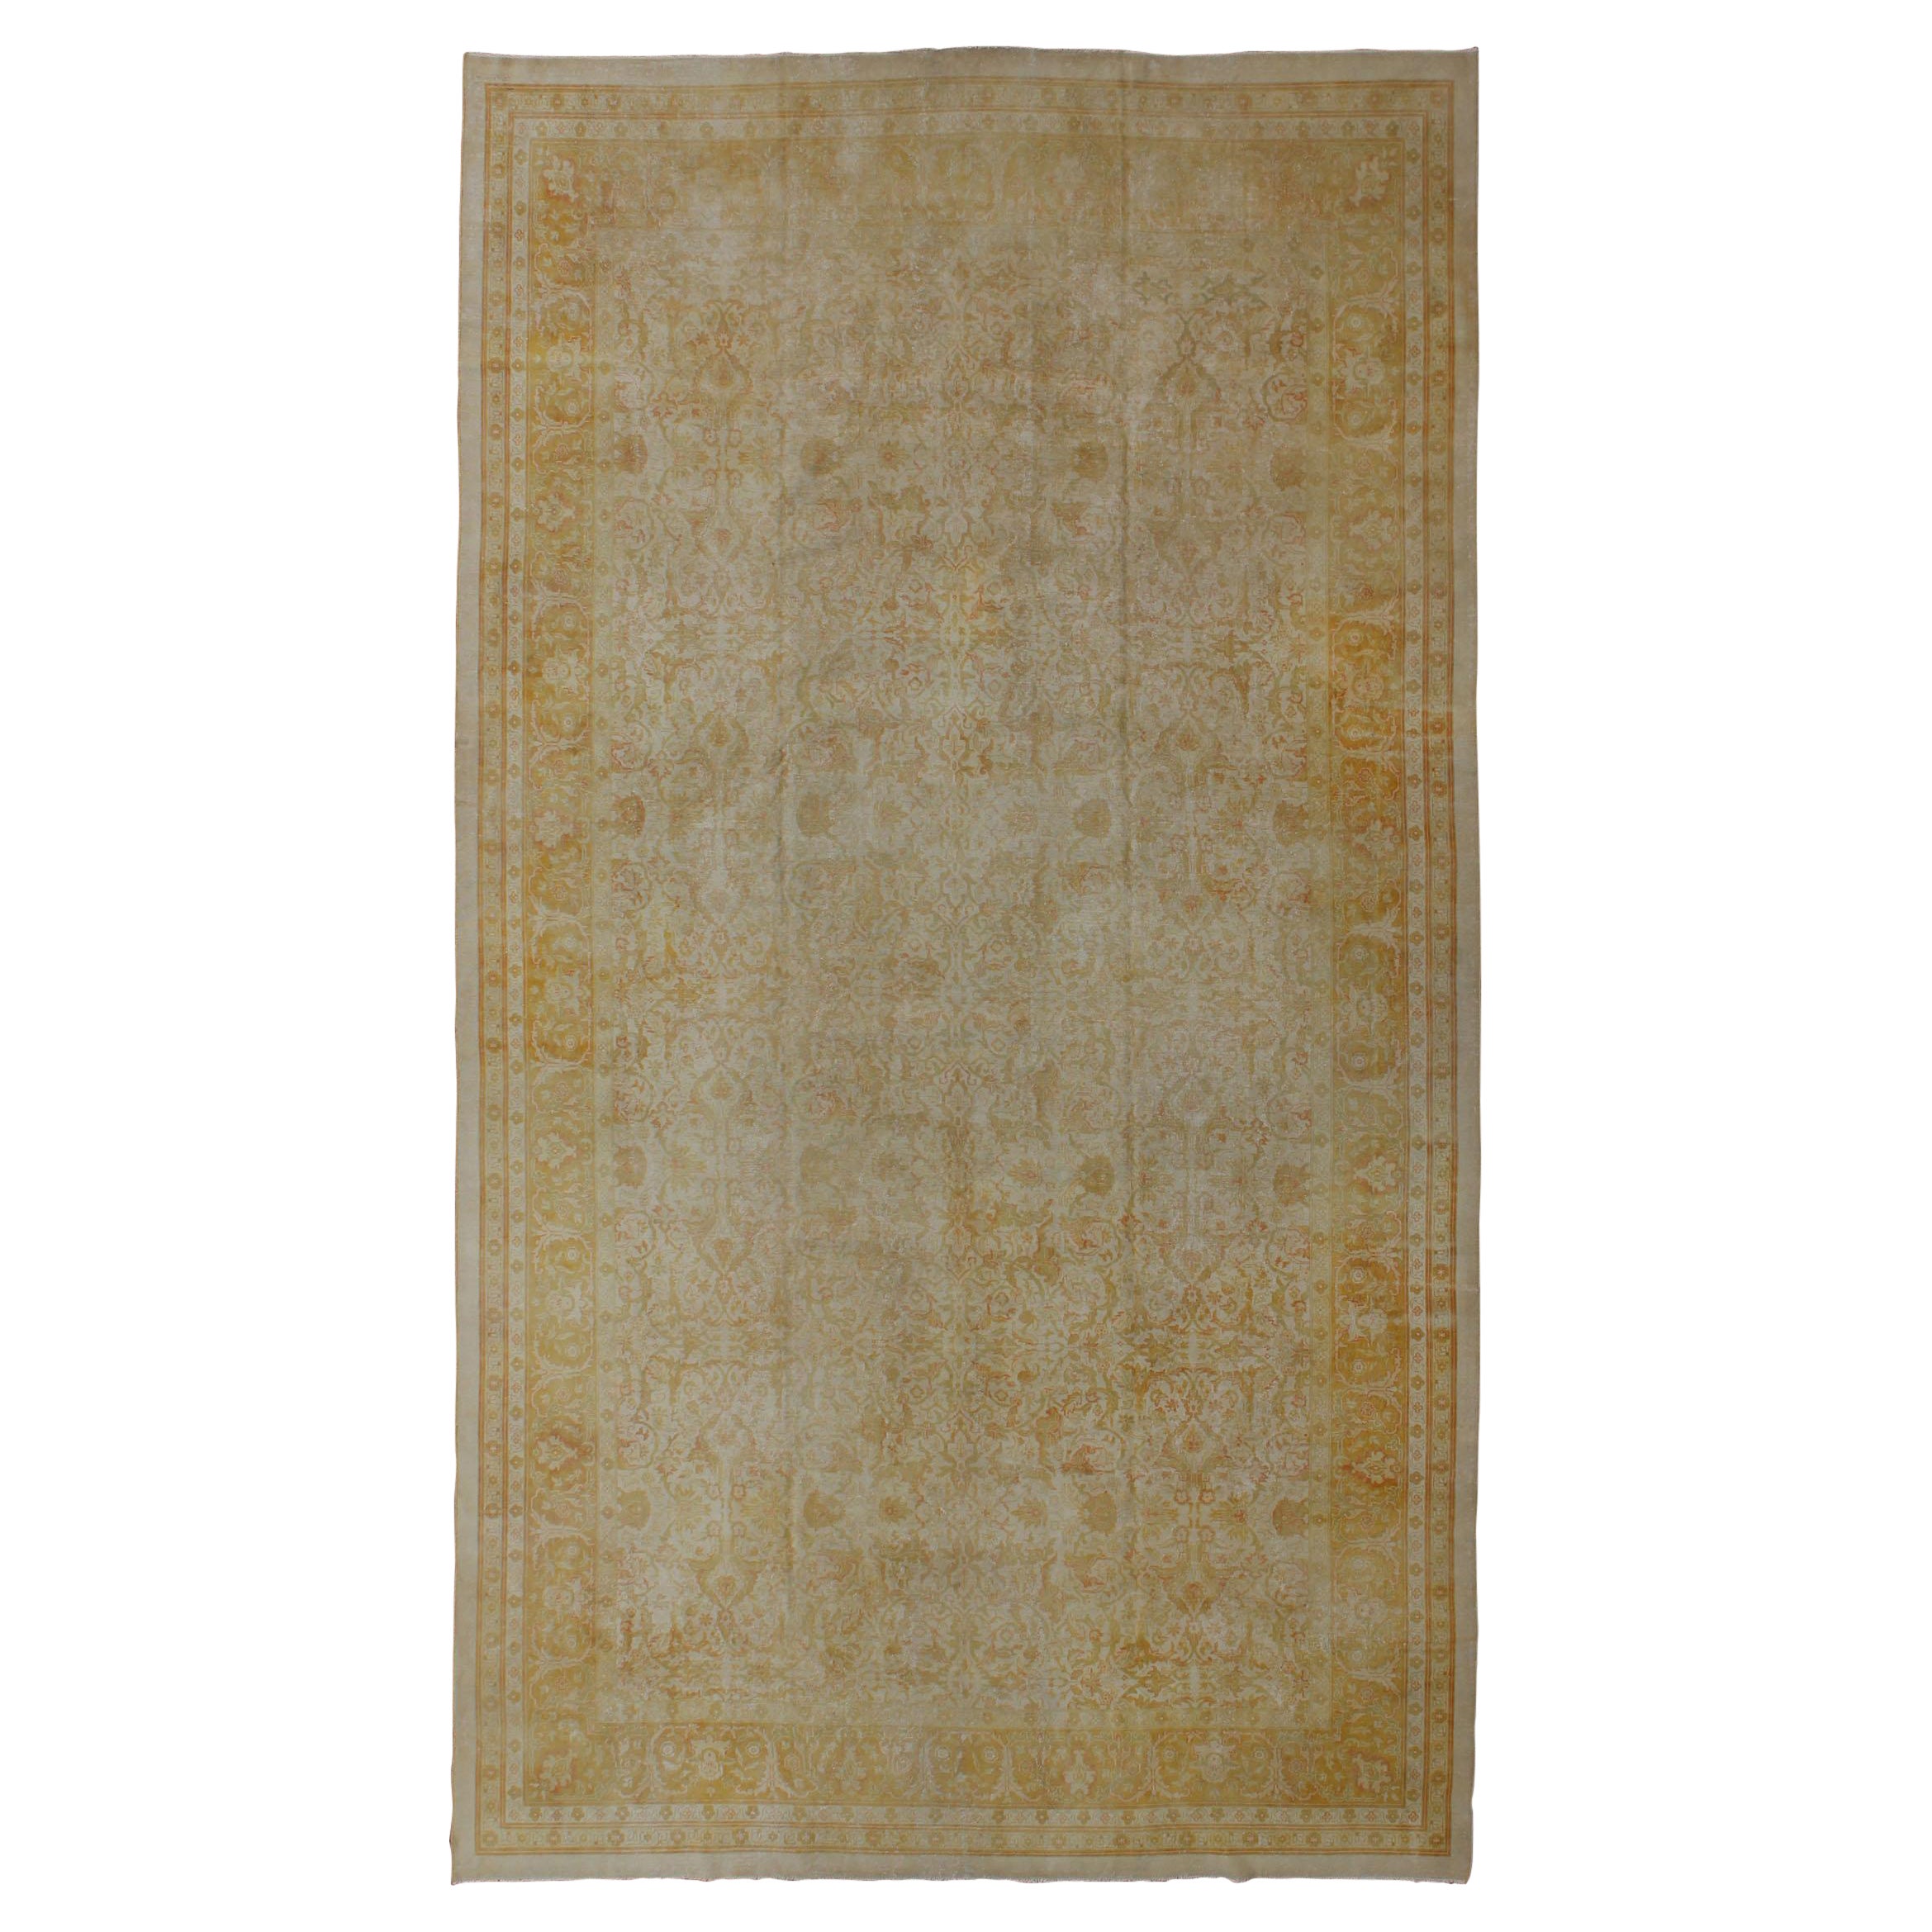 Large All Over Design Distressed Indian Amritsar Rug in Green, Yellow, and Ivory